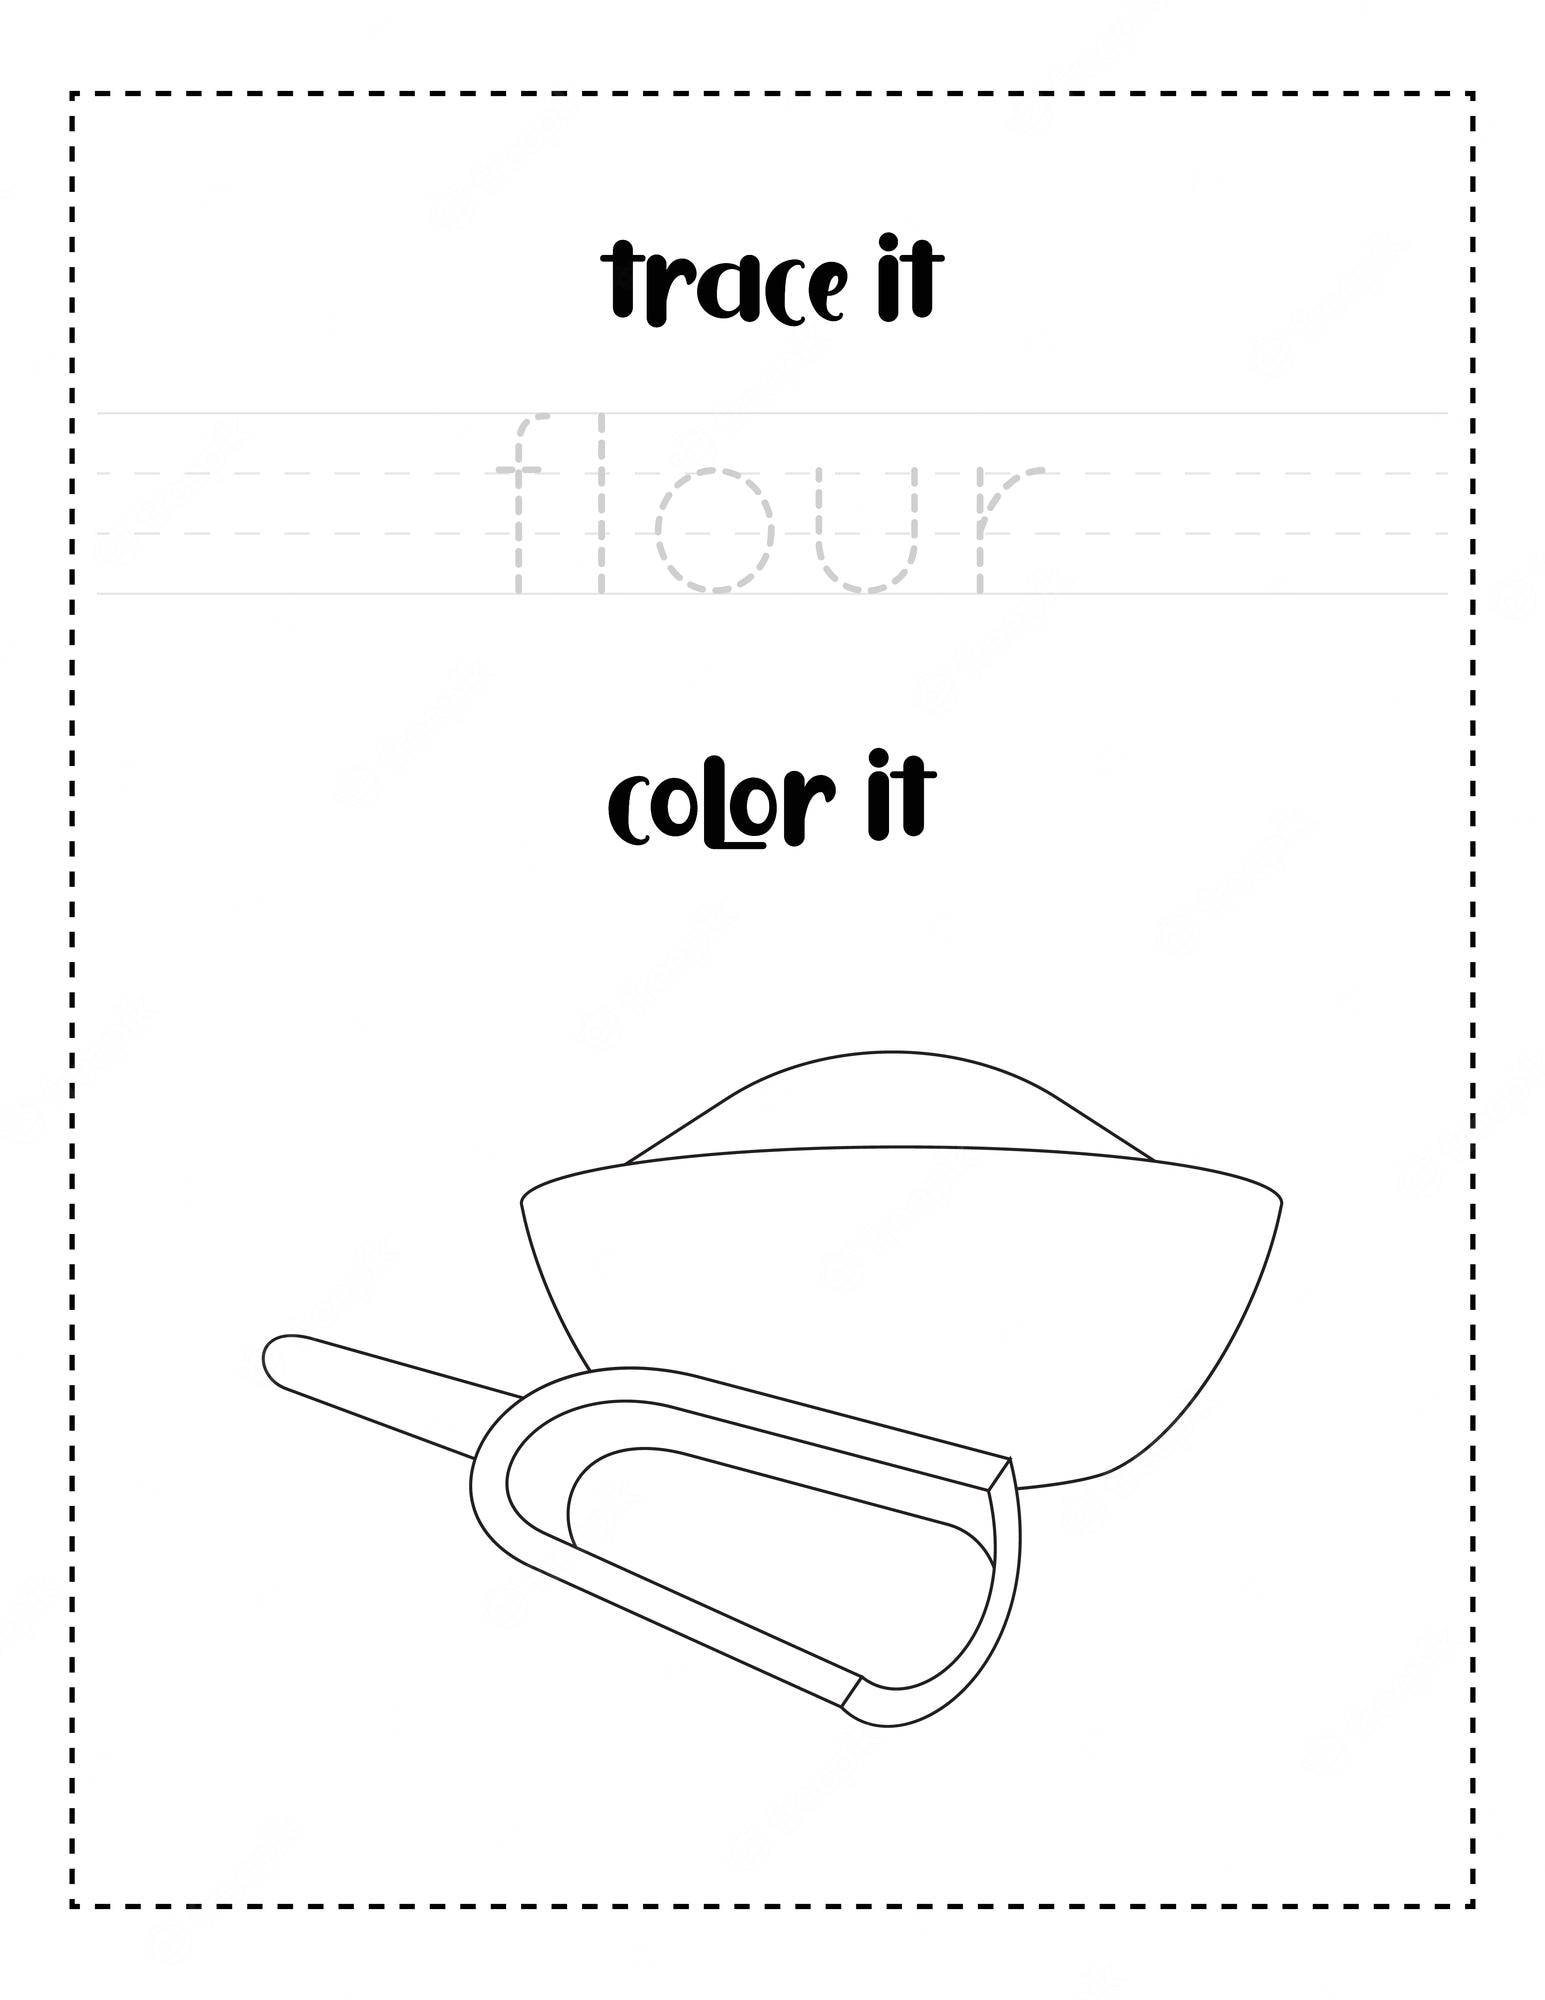 Premium Vector | Handwriting word tracing and color flour in a bowl  handwriting practice for kids